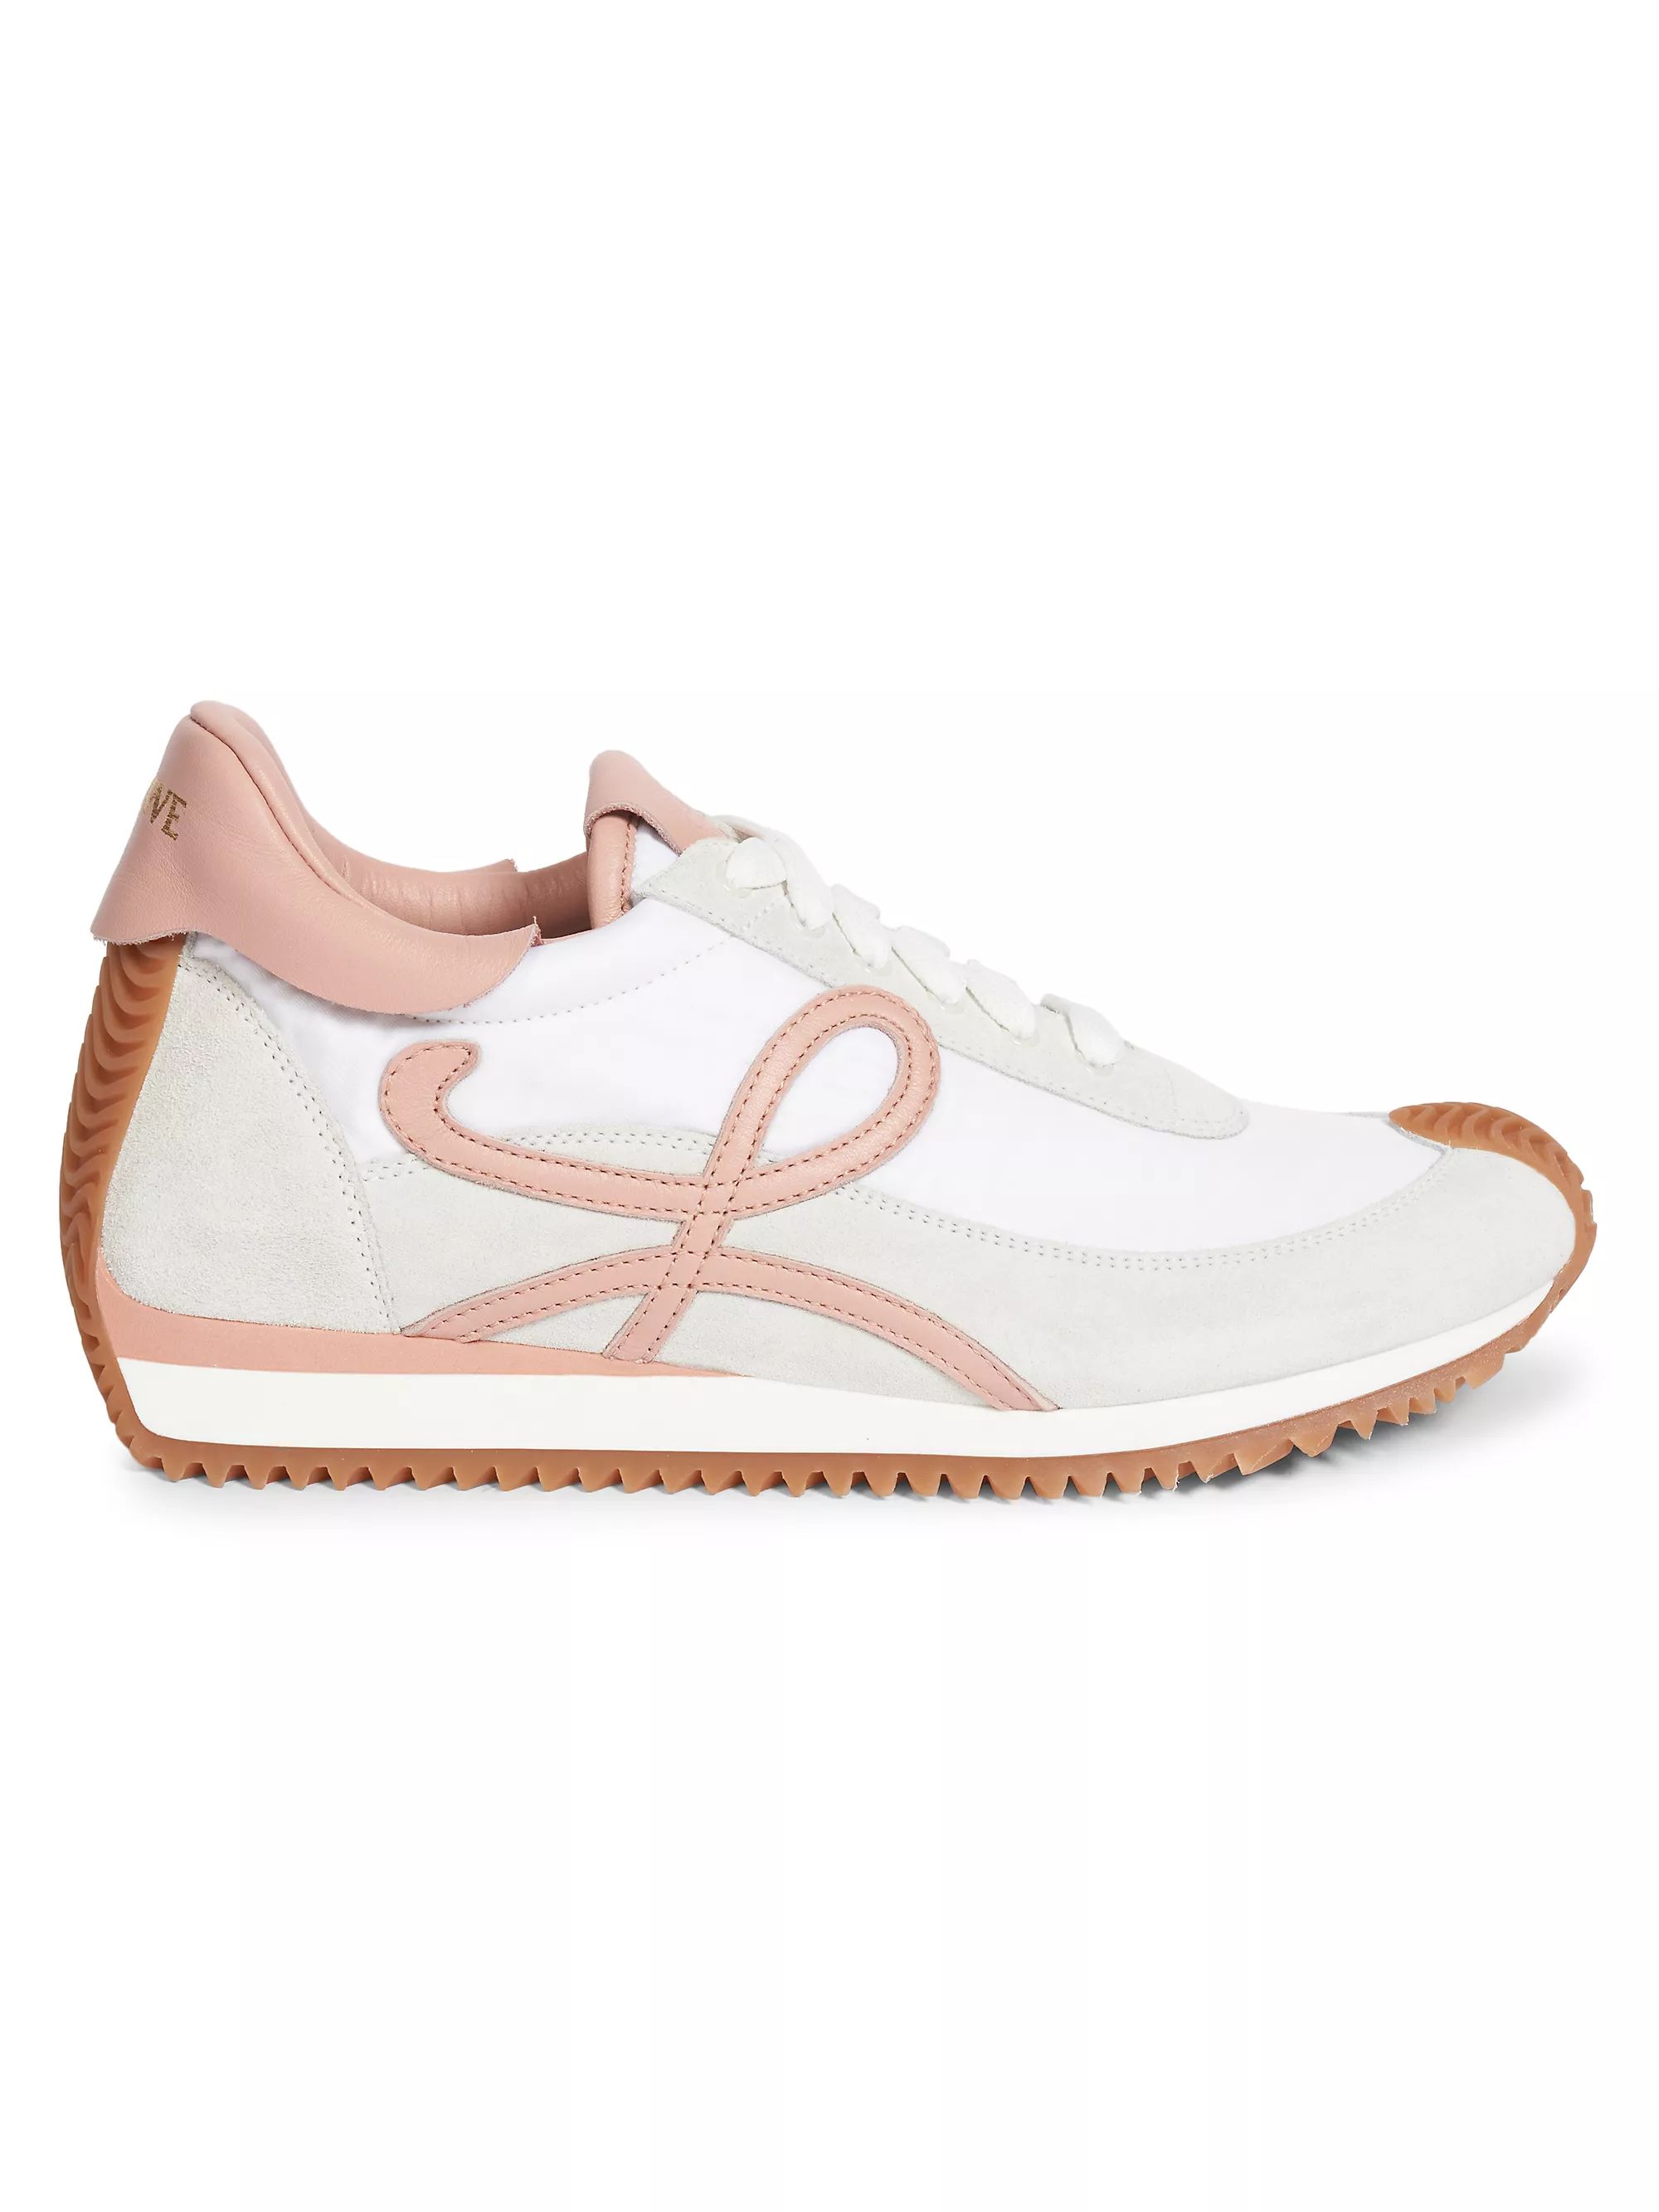 Flow Runner Mix Leather Sneakers | Saks Fifth Avenue